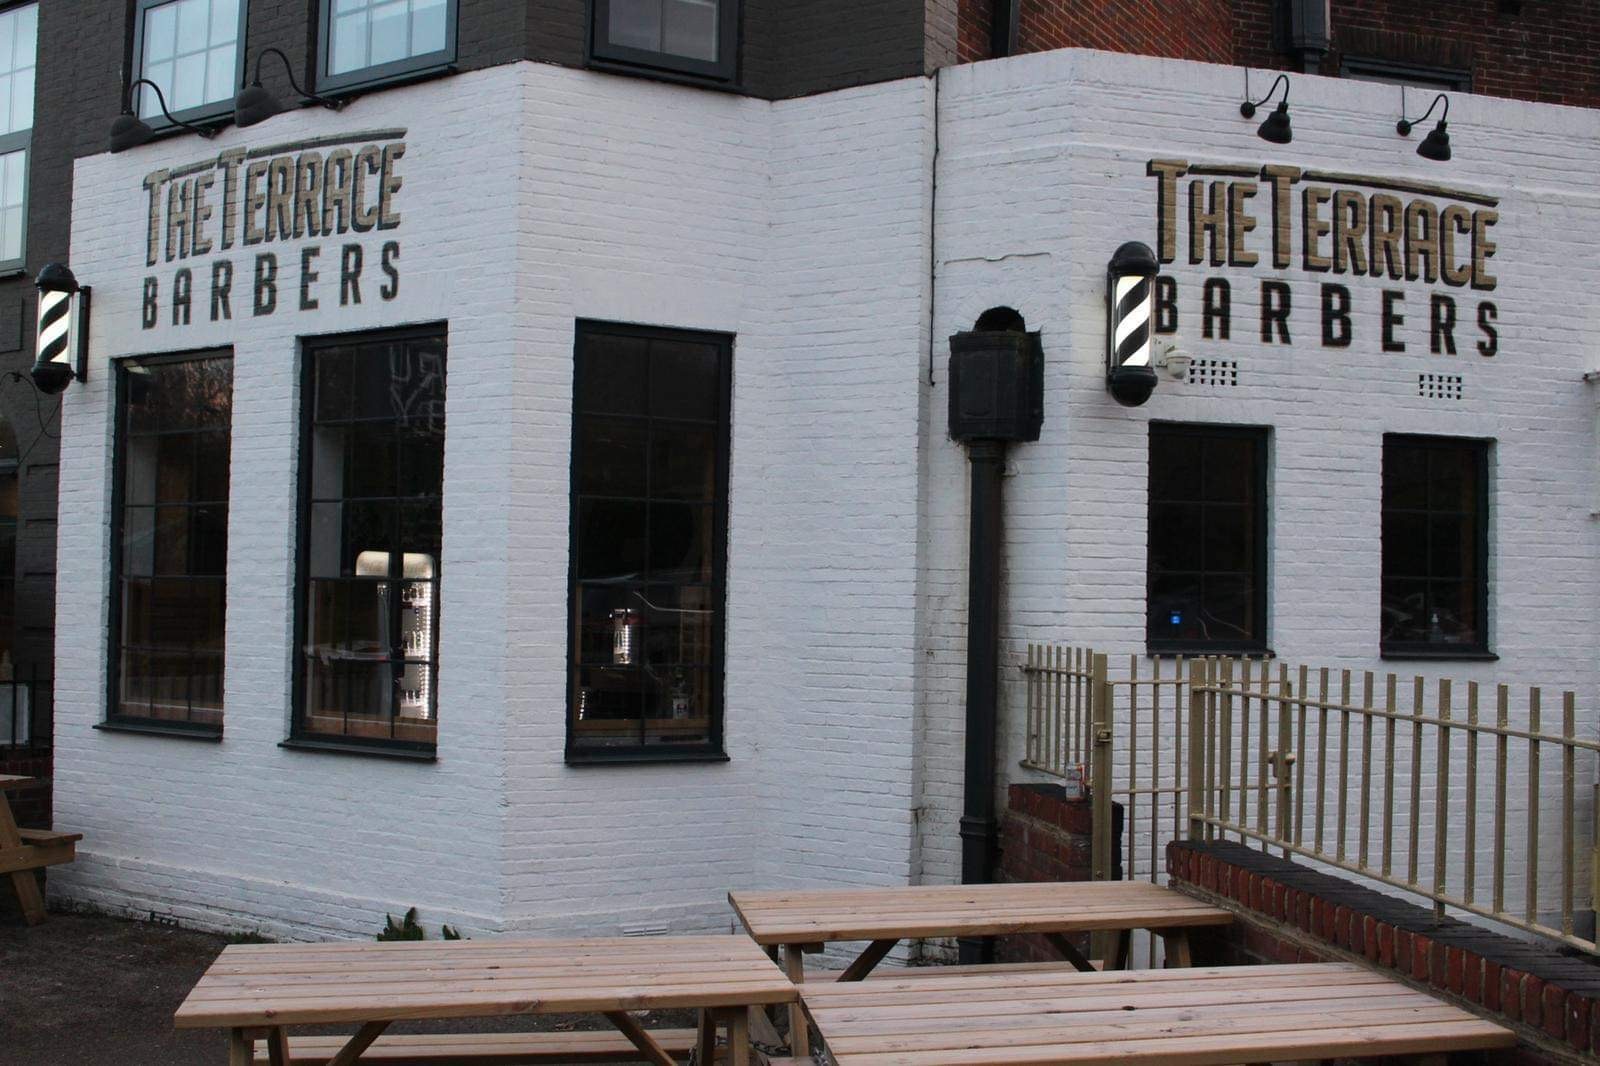 The Terrace Barbers is based at the Ruby Pub in Coldean, Brighton